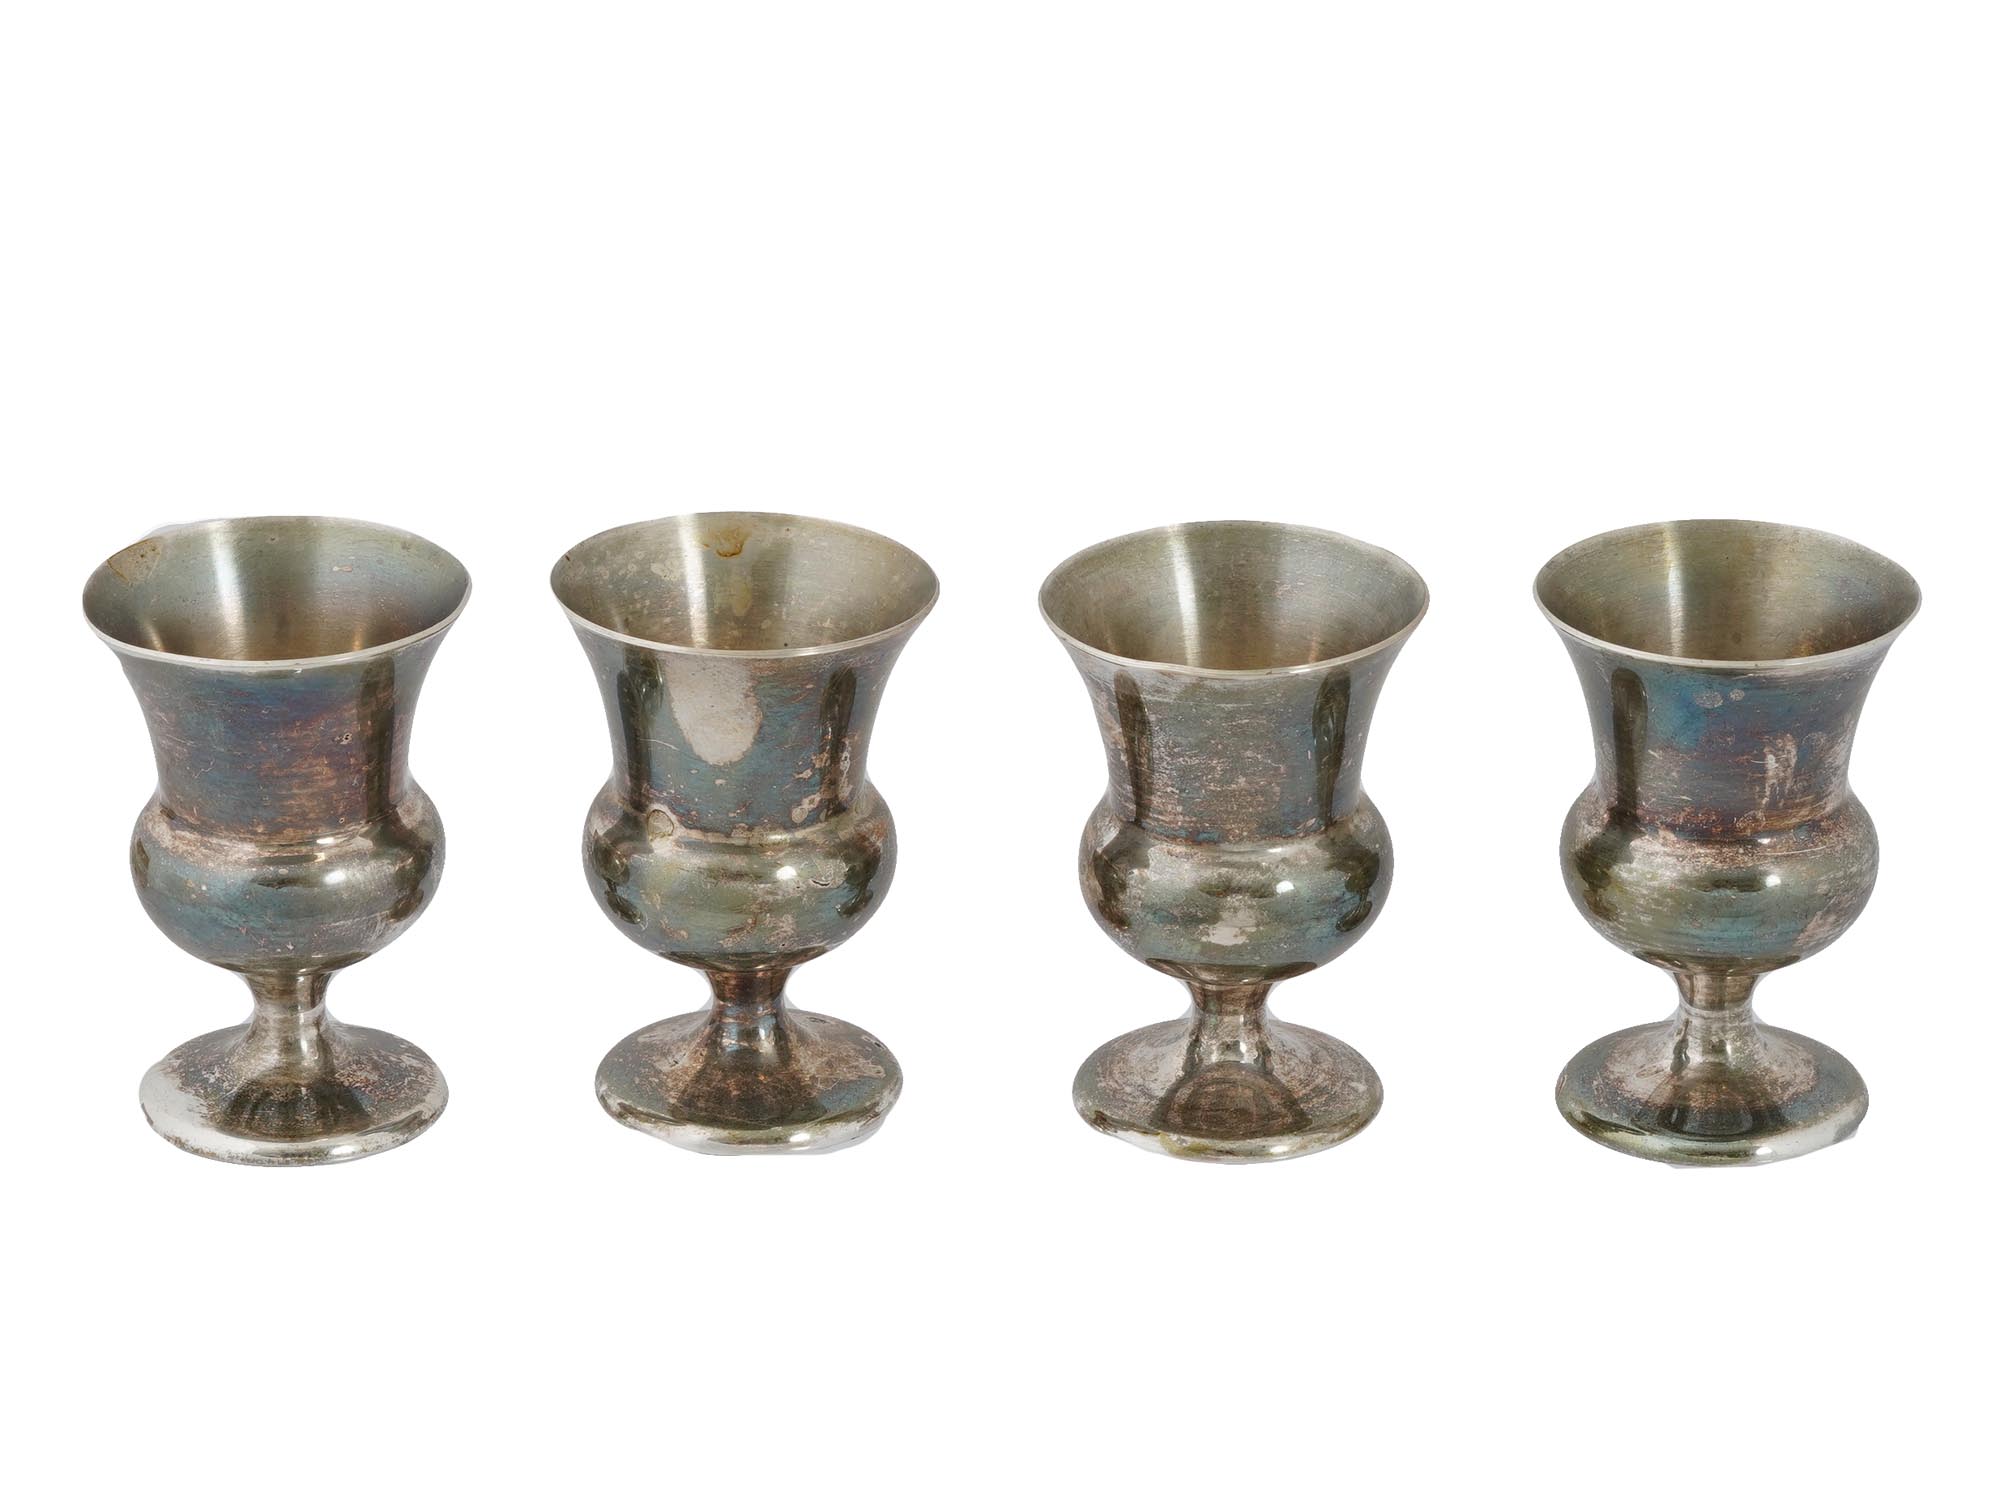 4 AMERICAN SILVER CUPS OR MINI GOBLETS BY GORHAM PIC-1